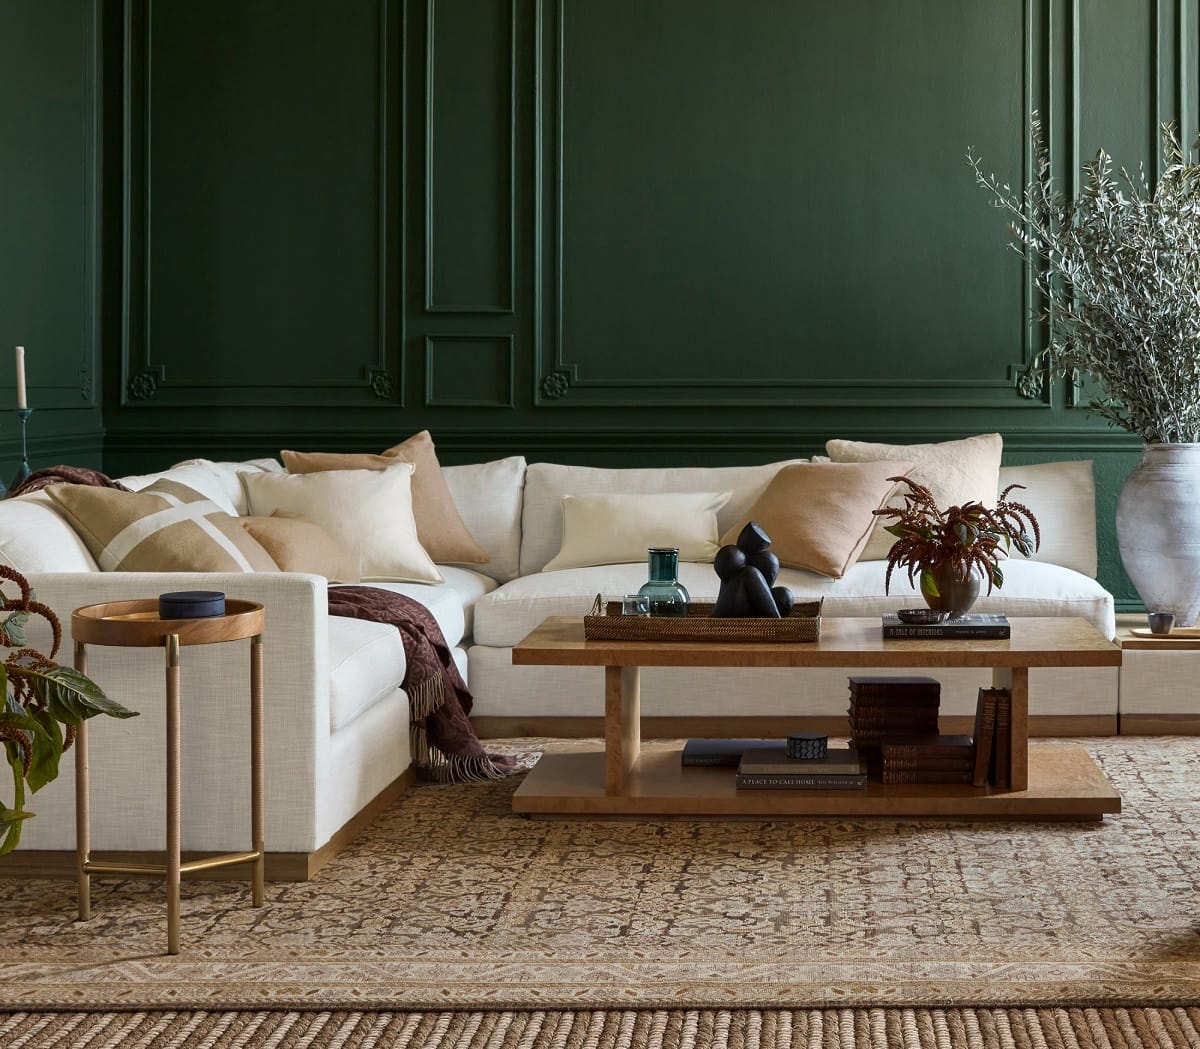 One of the best luxury online furniture stores